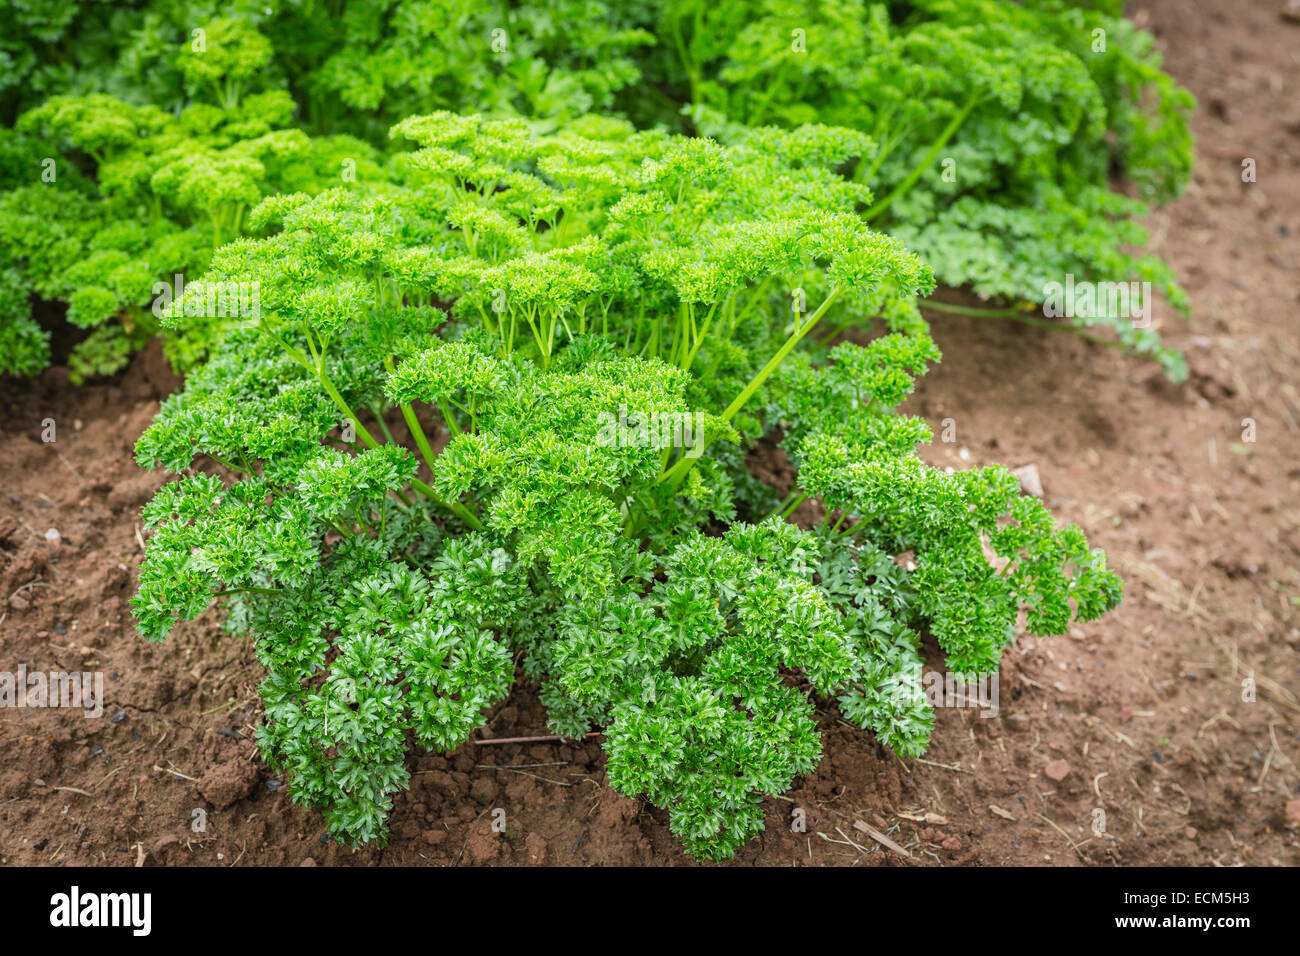 Curly parsley plant growing in the garden. Stock Photo